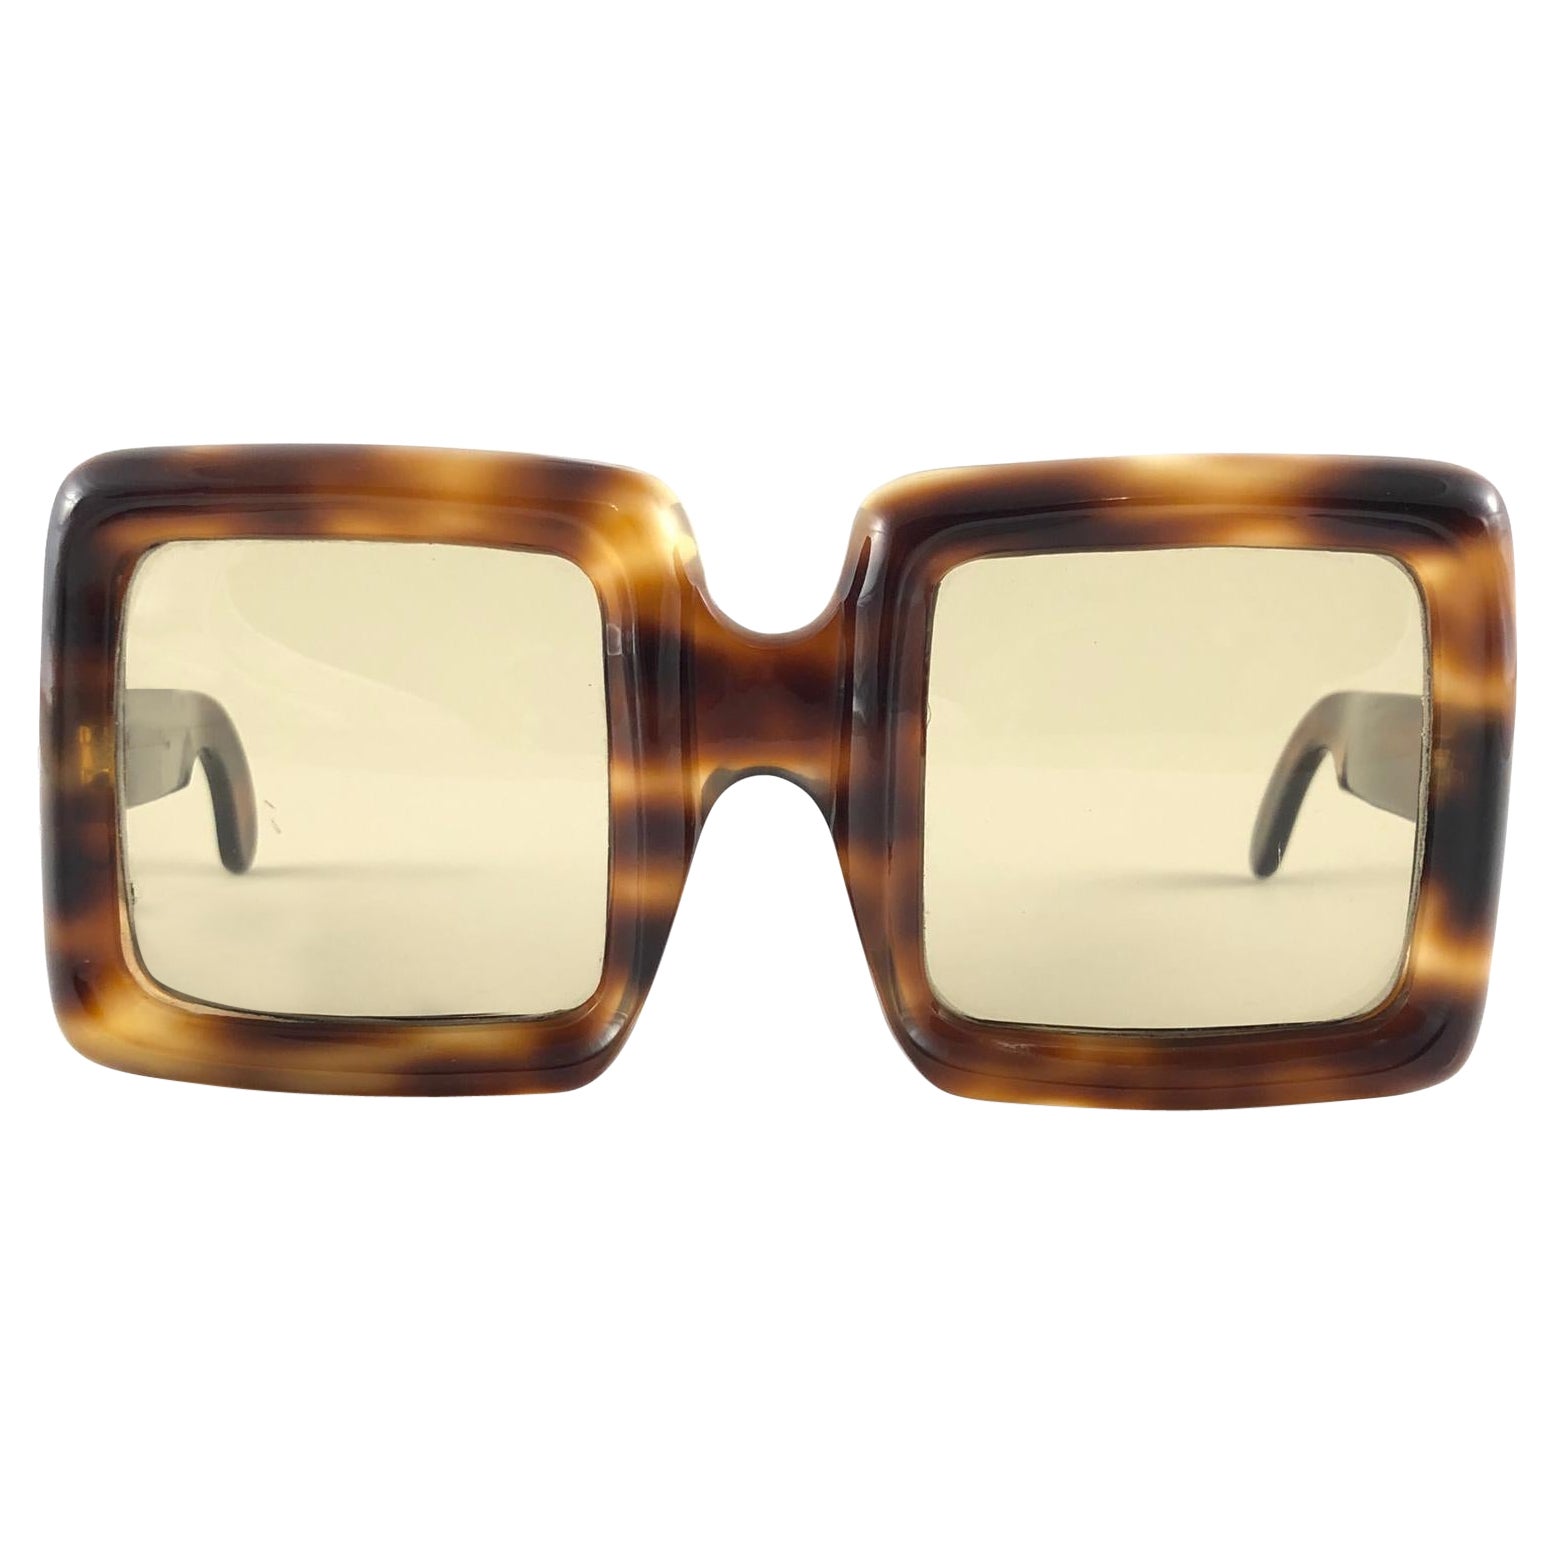 Rare Vintage Lanvin by Philippe Chevallier Tortoise Oversized 1960 Sunglasses For Sale